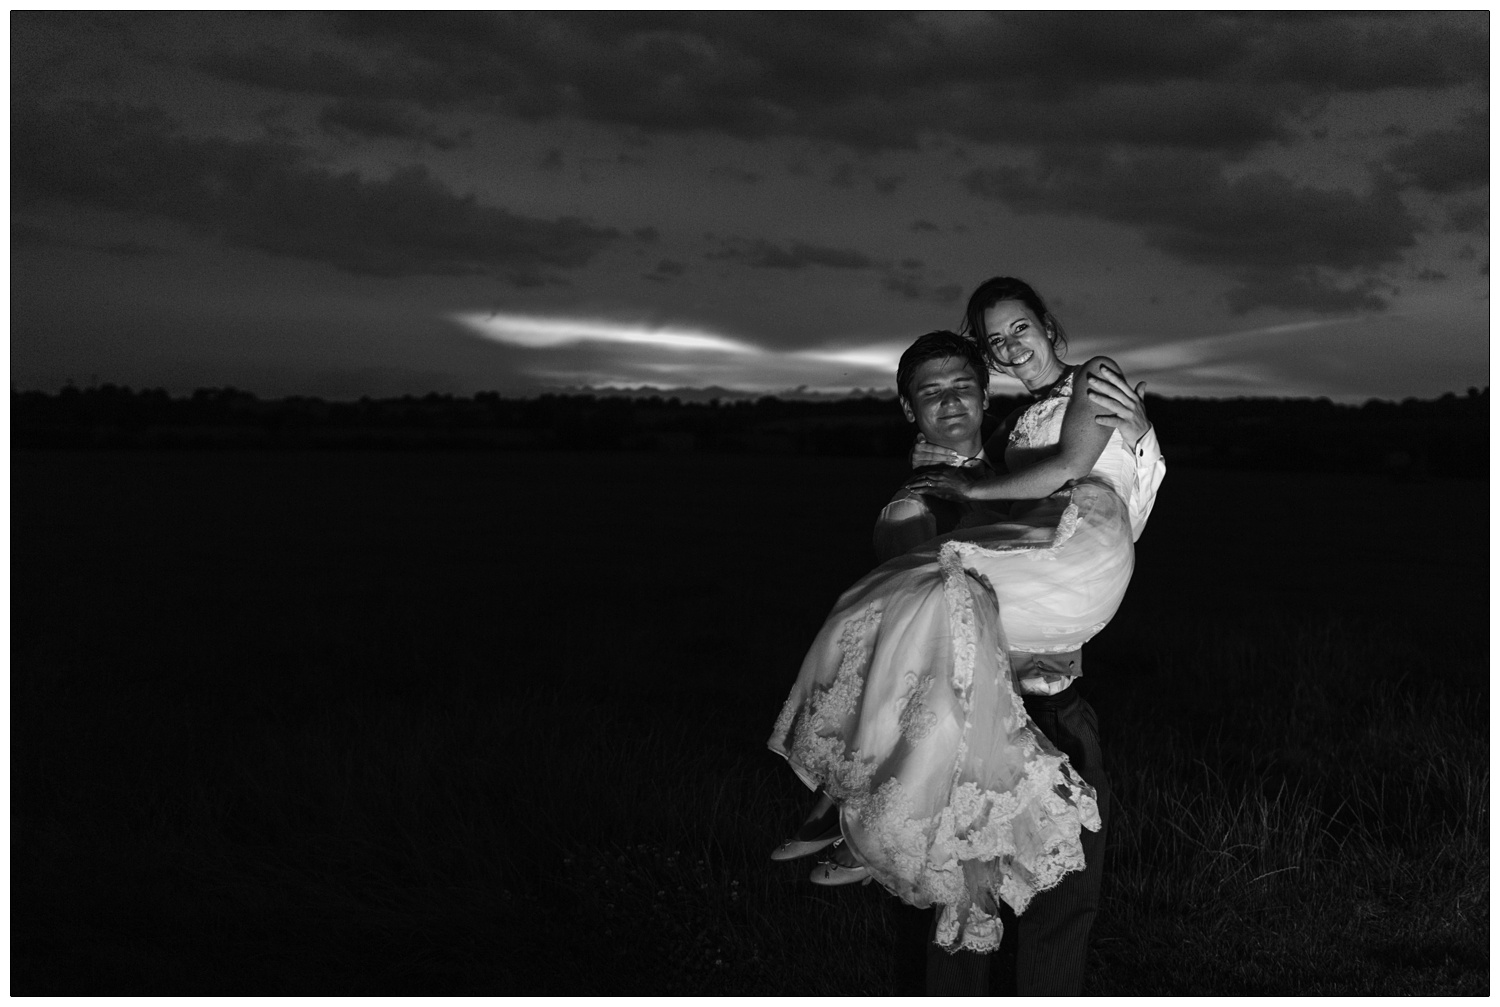 Black and white photograph taken at twilight. The groom is carrying his new wife.